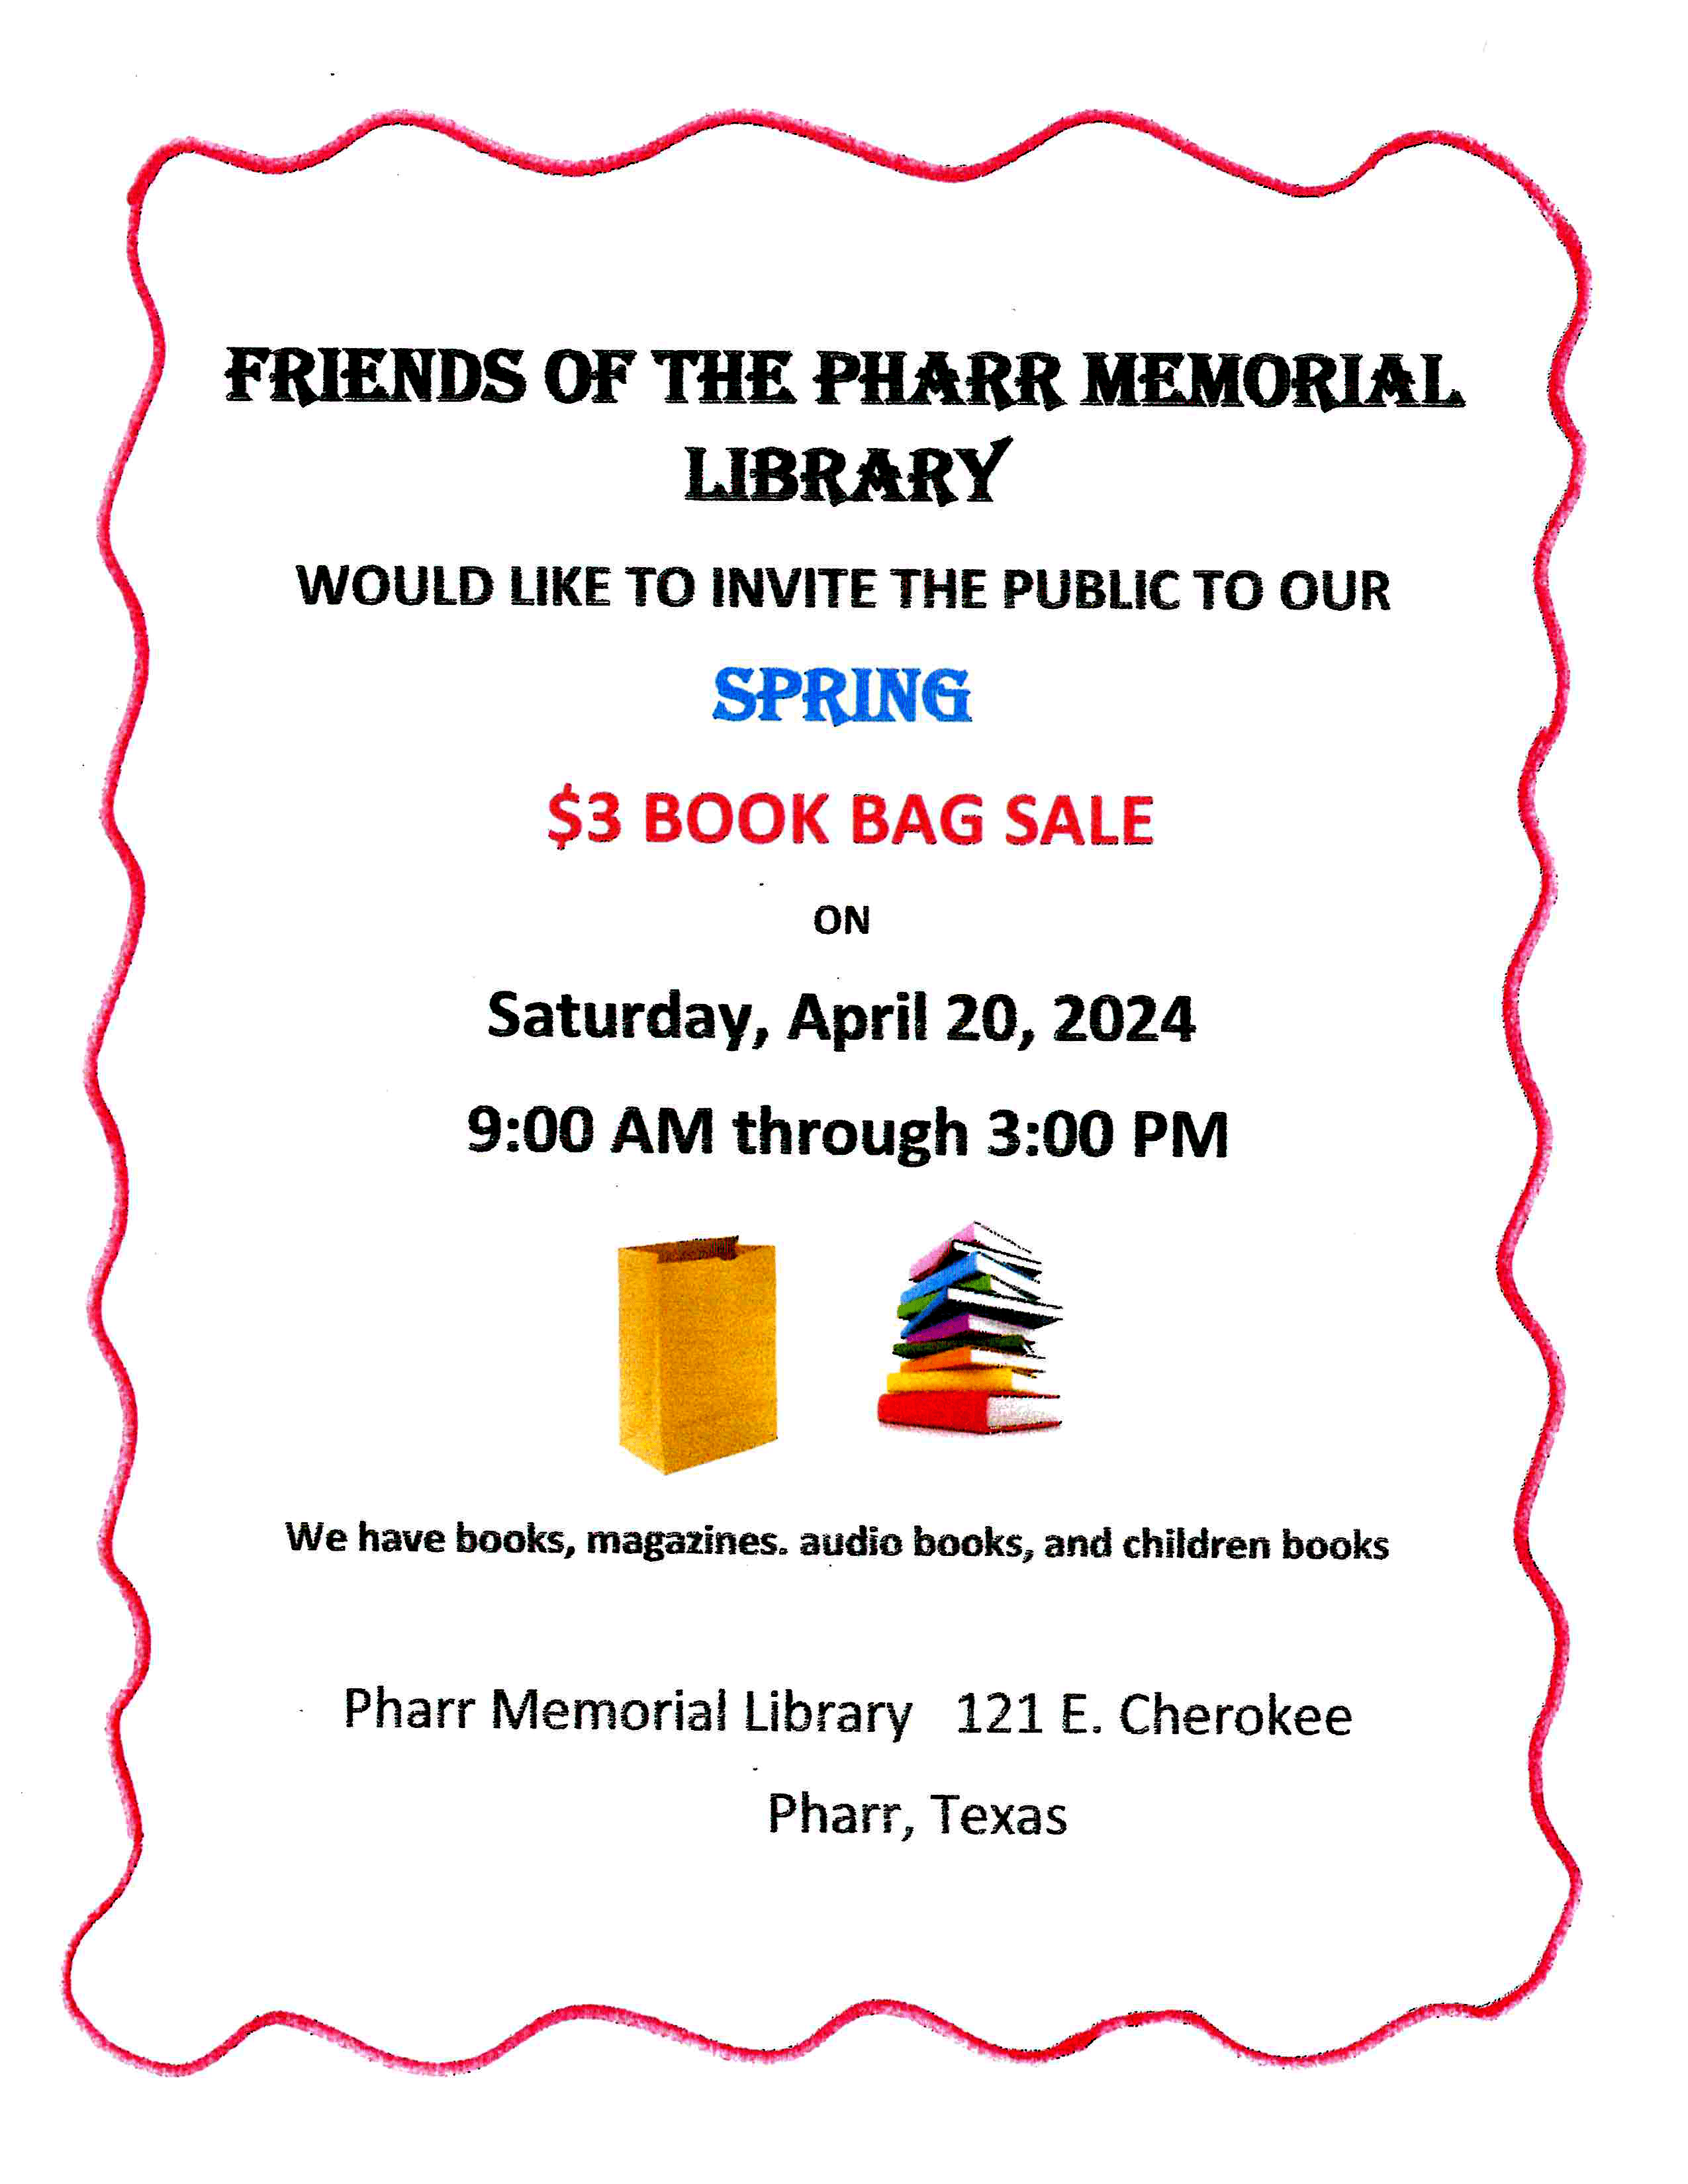 FRIENDS OF THE PHARR MEMORIAL<br />
LIBRARY<br />
WOULD LIKE TO INVITE THE PUBLIC TO OUR SPRING<br />
$3 BOOK BAG SALE<br />
ON<br />
Saturday, April 20, 2024<br />
9:00 AM through 3:00 PM<br />
We have books, magazines. audio books, and children books<br />
• Pharr Memorial Library 121 E. Cherokee<br />
Pharr, Texas